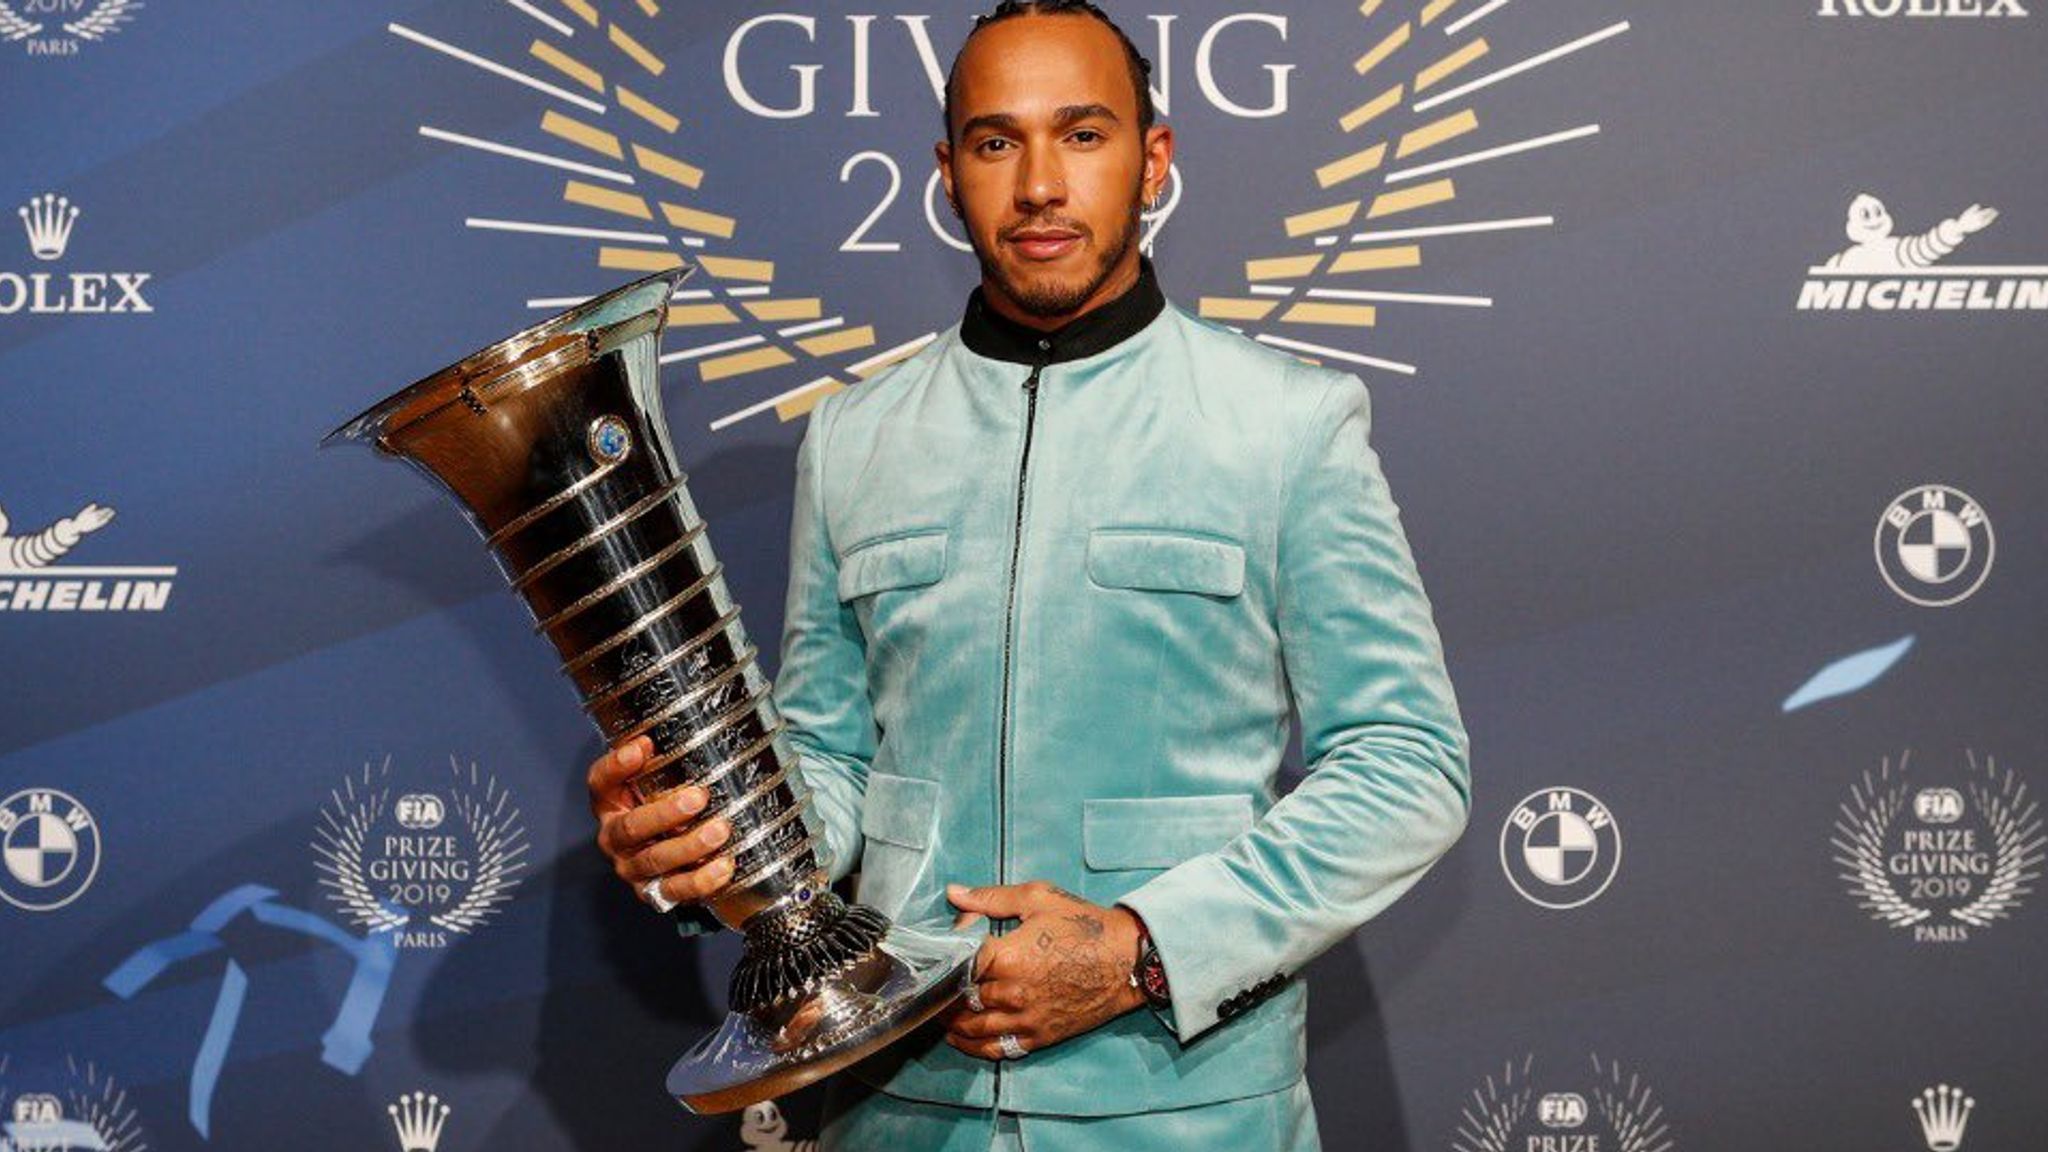 Lewis Hamilton officially crowned 2019 F1 champion at FIA gala | F1 News